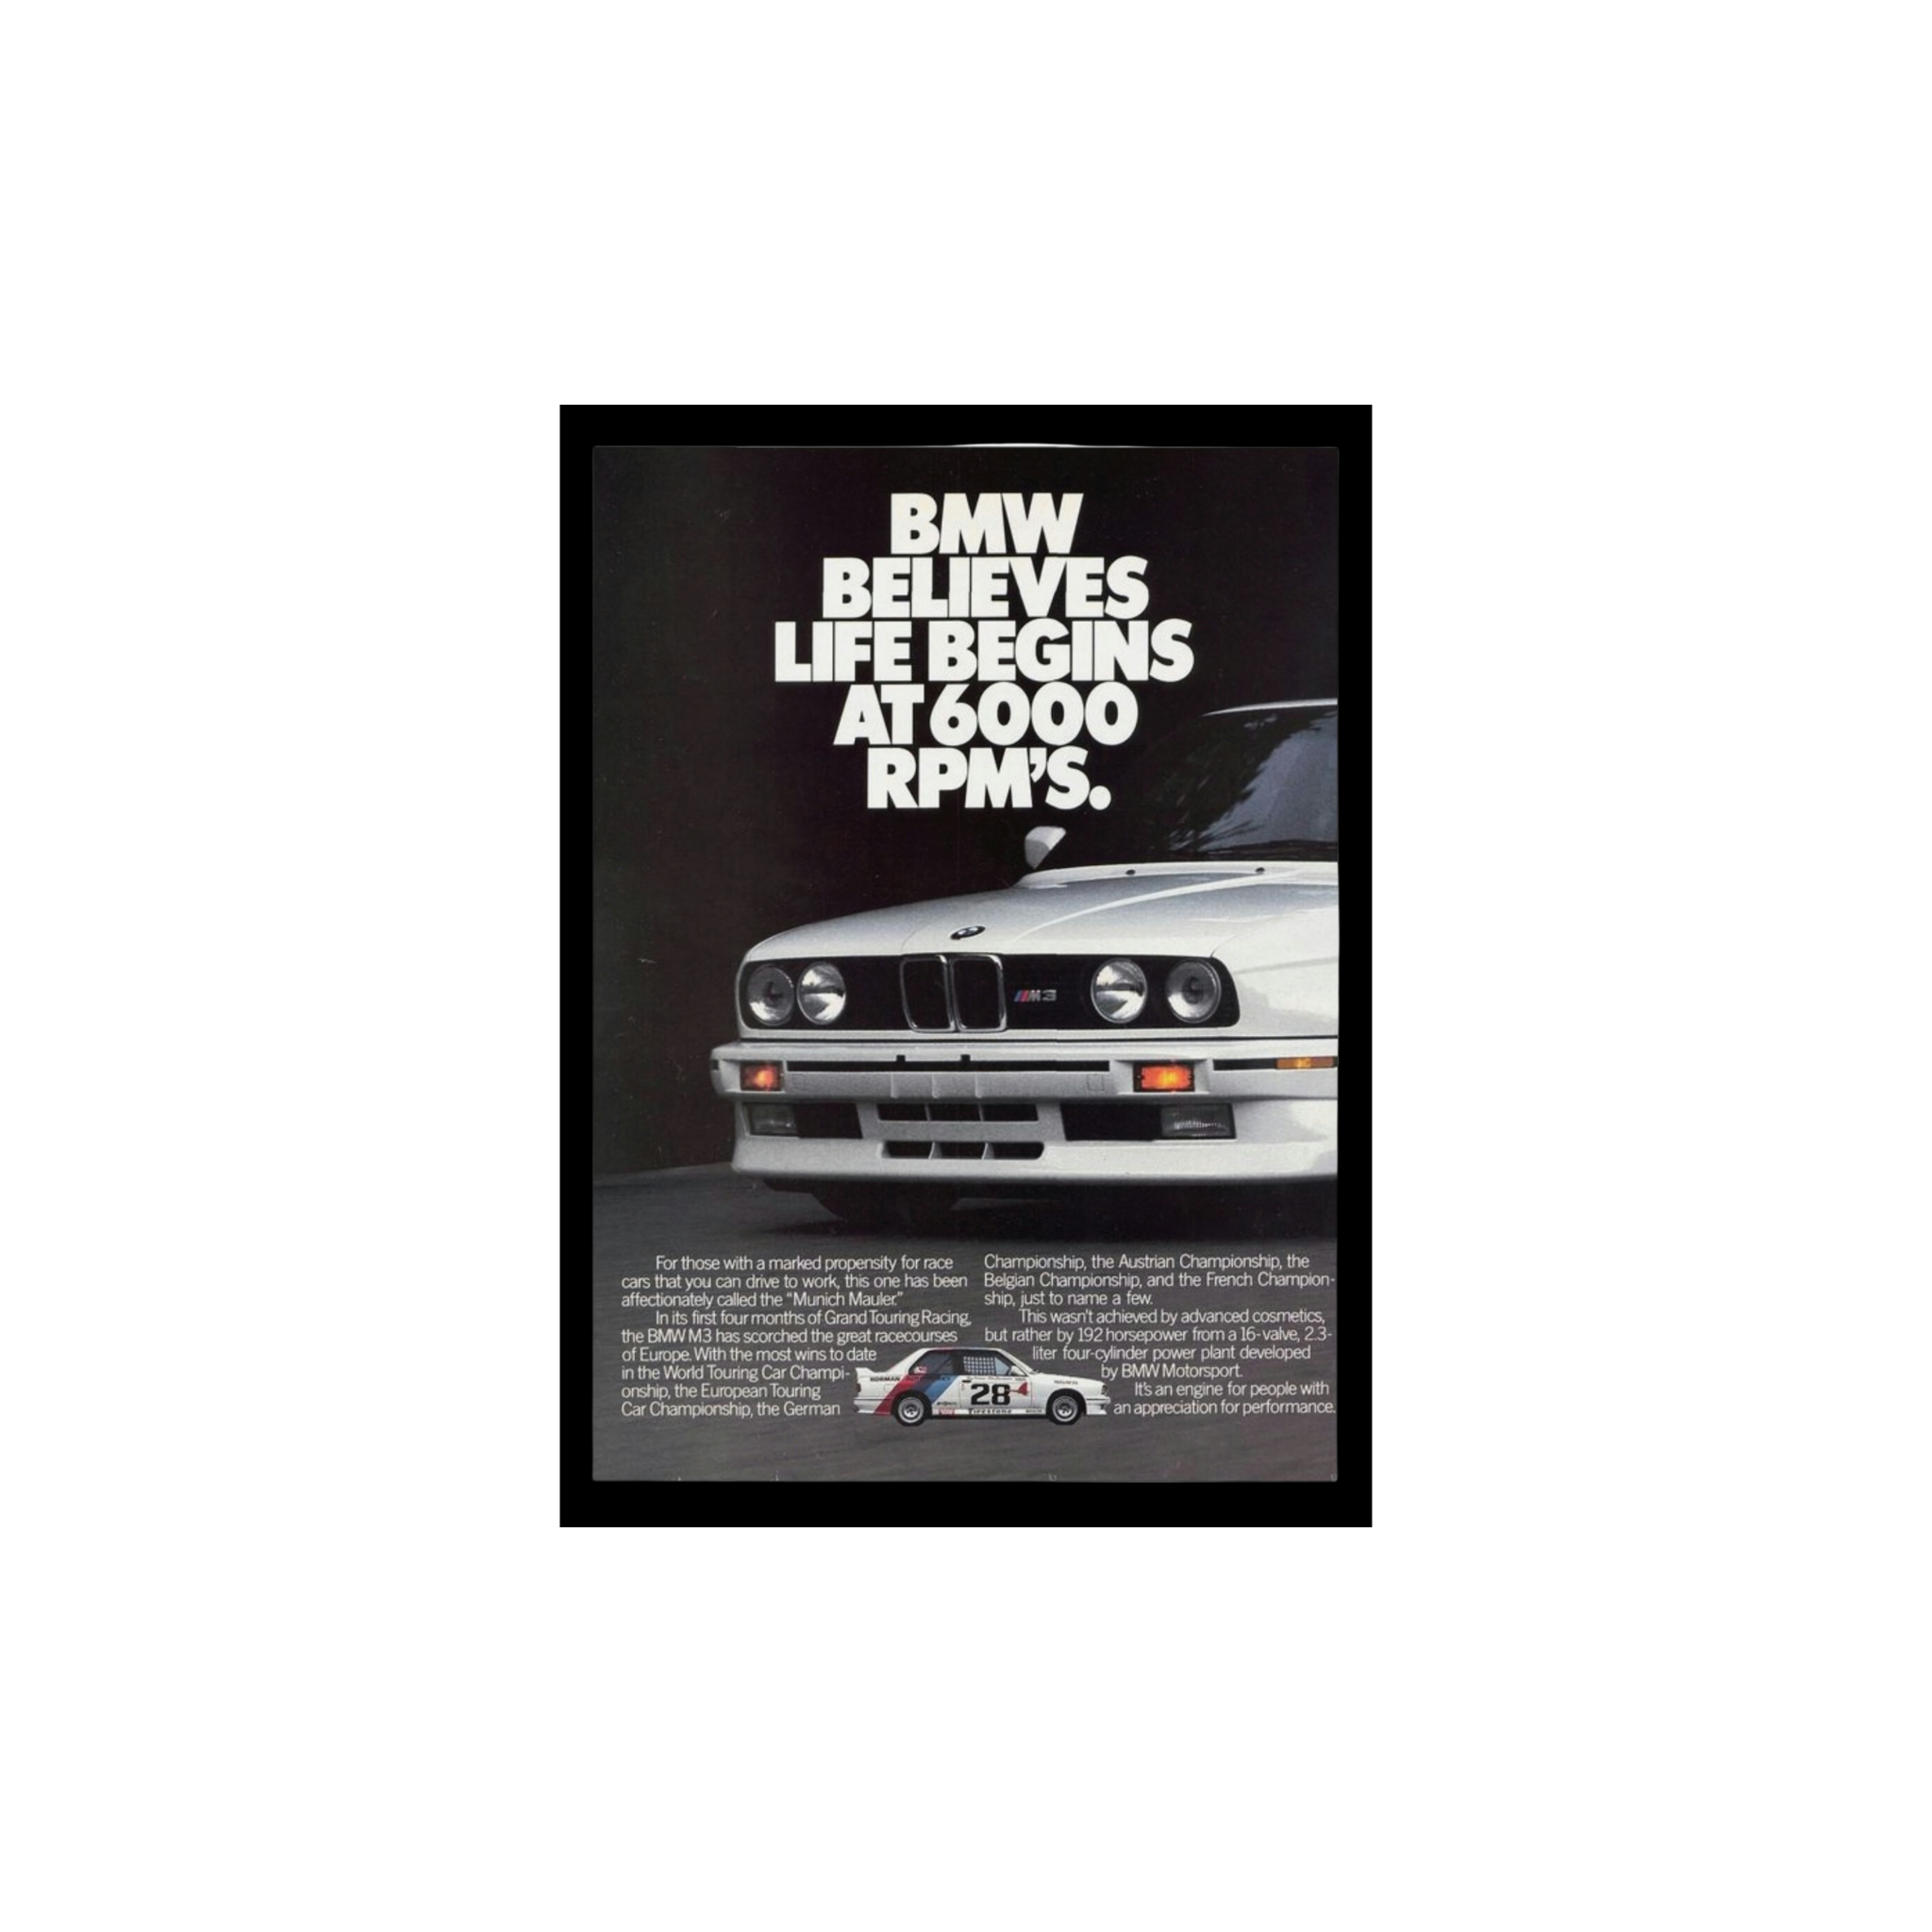 BMW E30 M3 BMW believes life begins at 6000 RPM´s poster